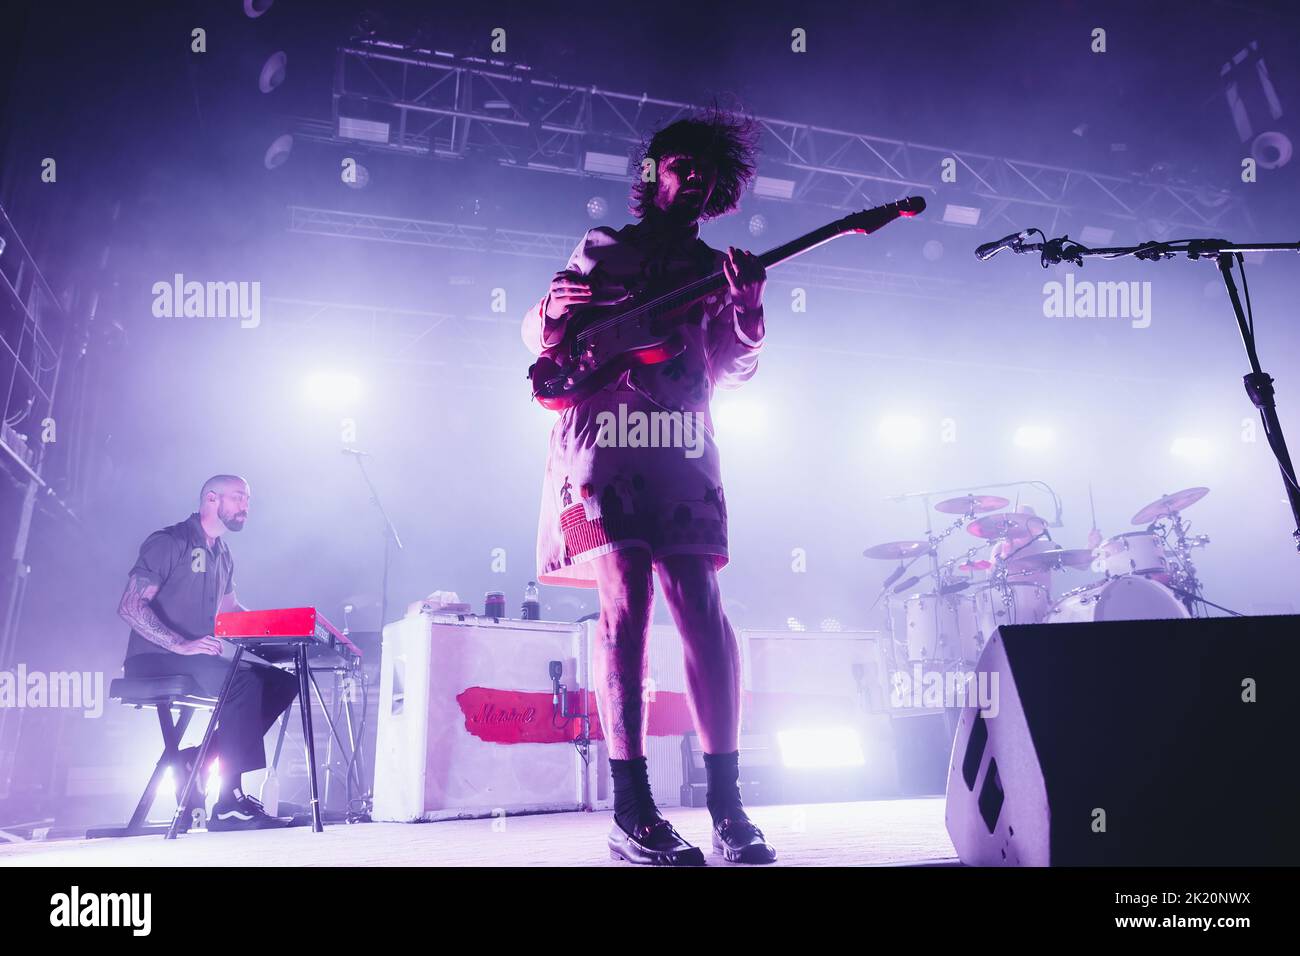 BARCELONA - SEP 11: Biffy Clyro (Scottish rock band) perform on stage at Razzmatazz on September 11, 2022 in Barcelona, Spain. Stock Photo